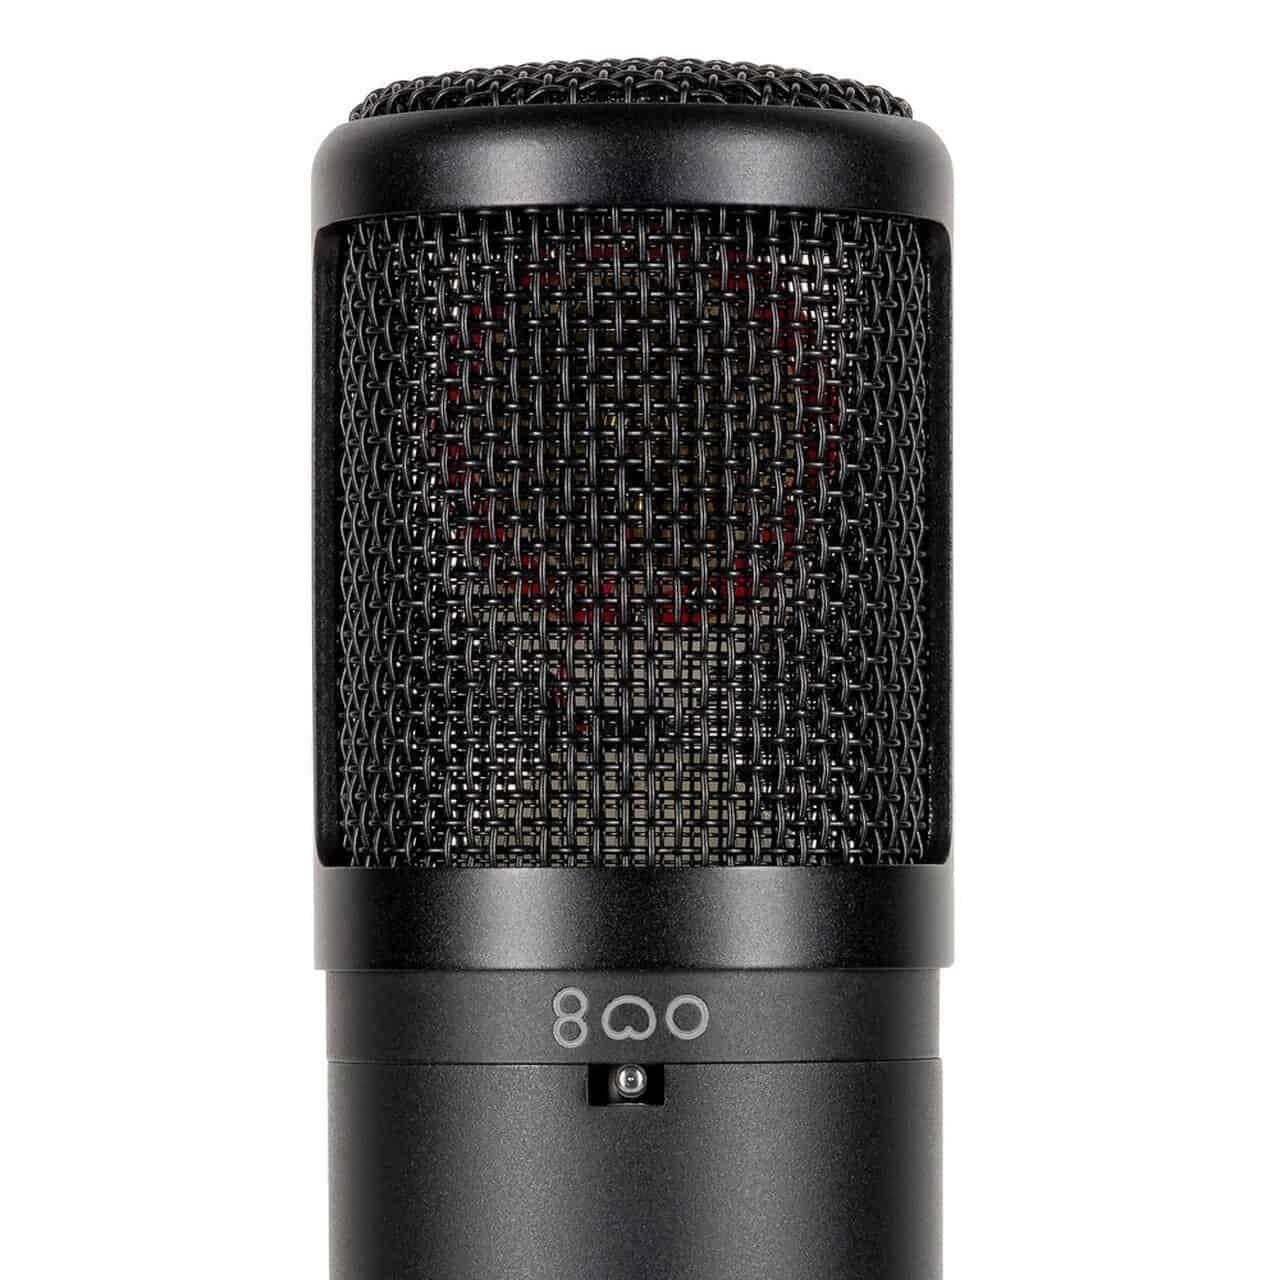 sE sE2300 Large-Diaphragm Multi-Pattern Condenser Microphone - Live & Recording - Microphones by sE Electronics at Muso's Stuff